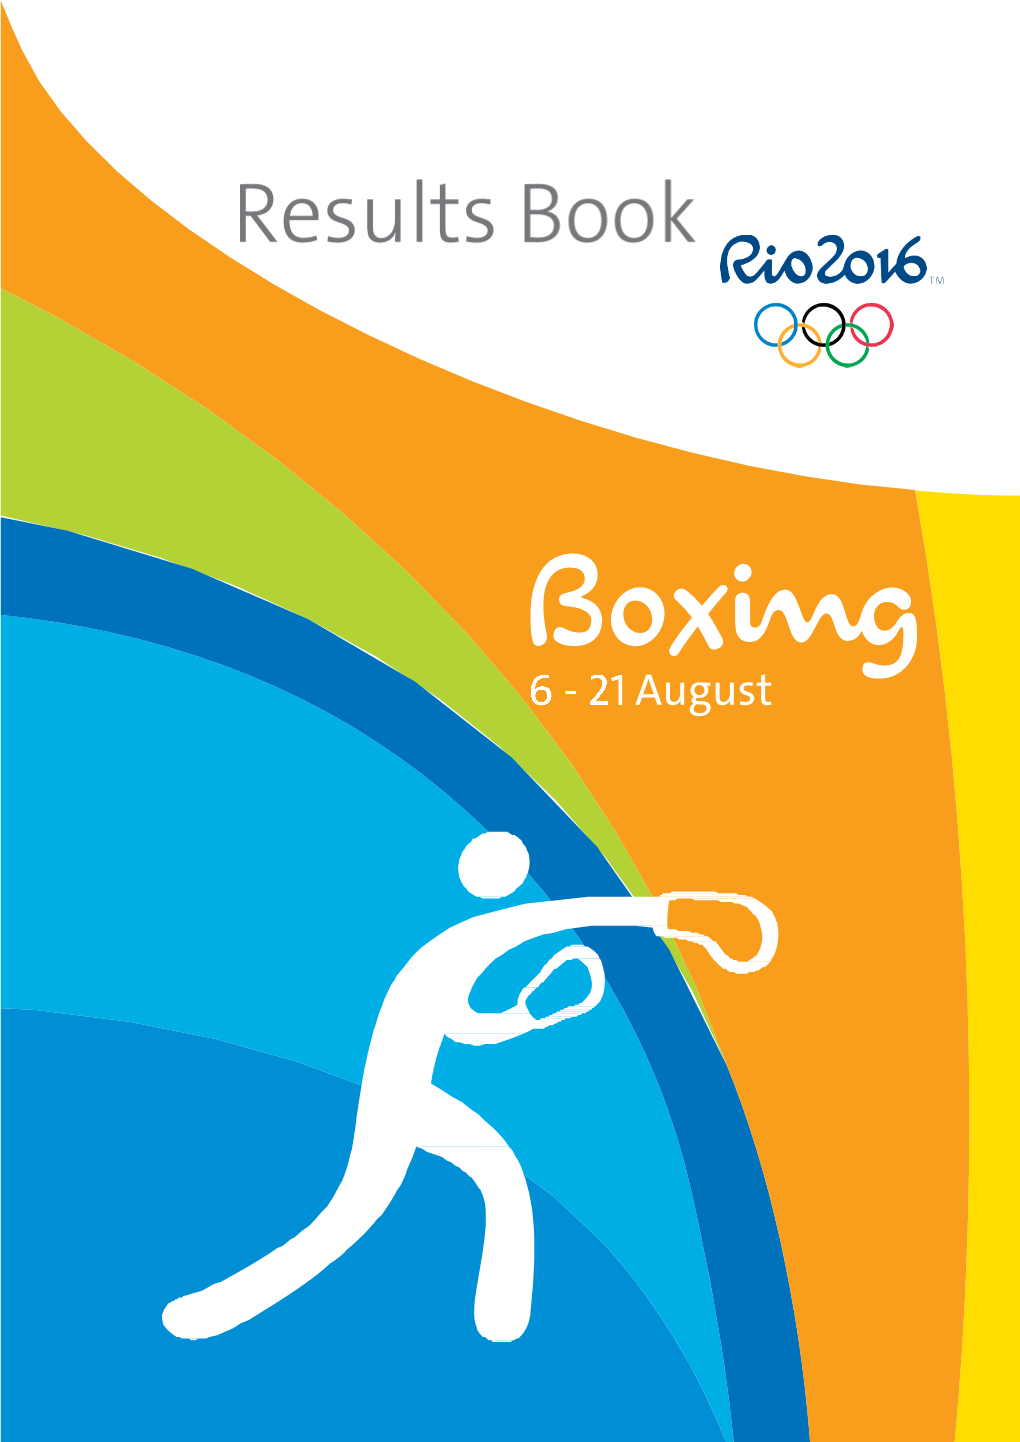 Results Are Permitted at the Rio 2016 Games